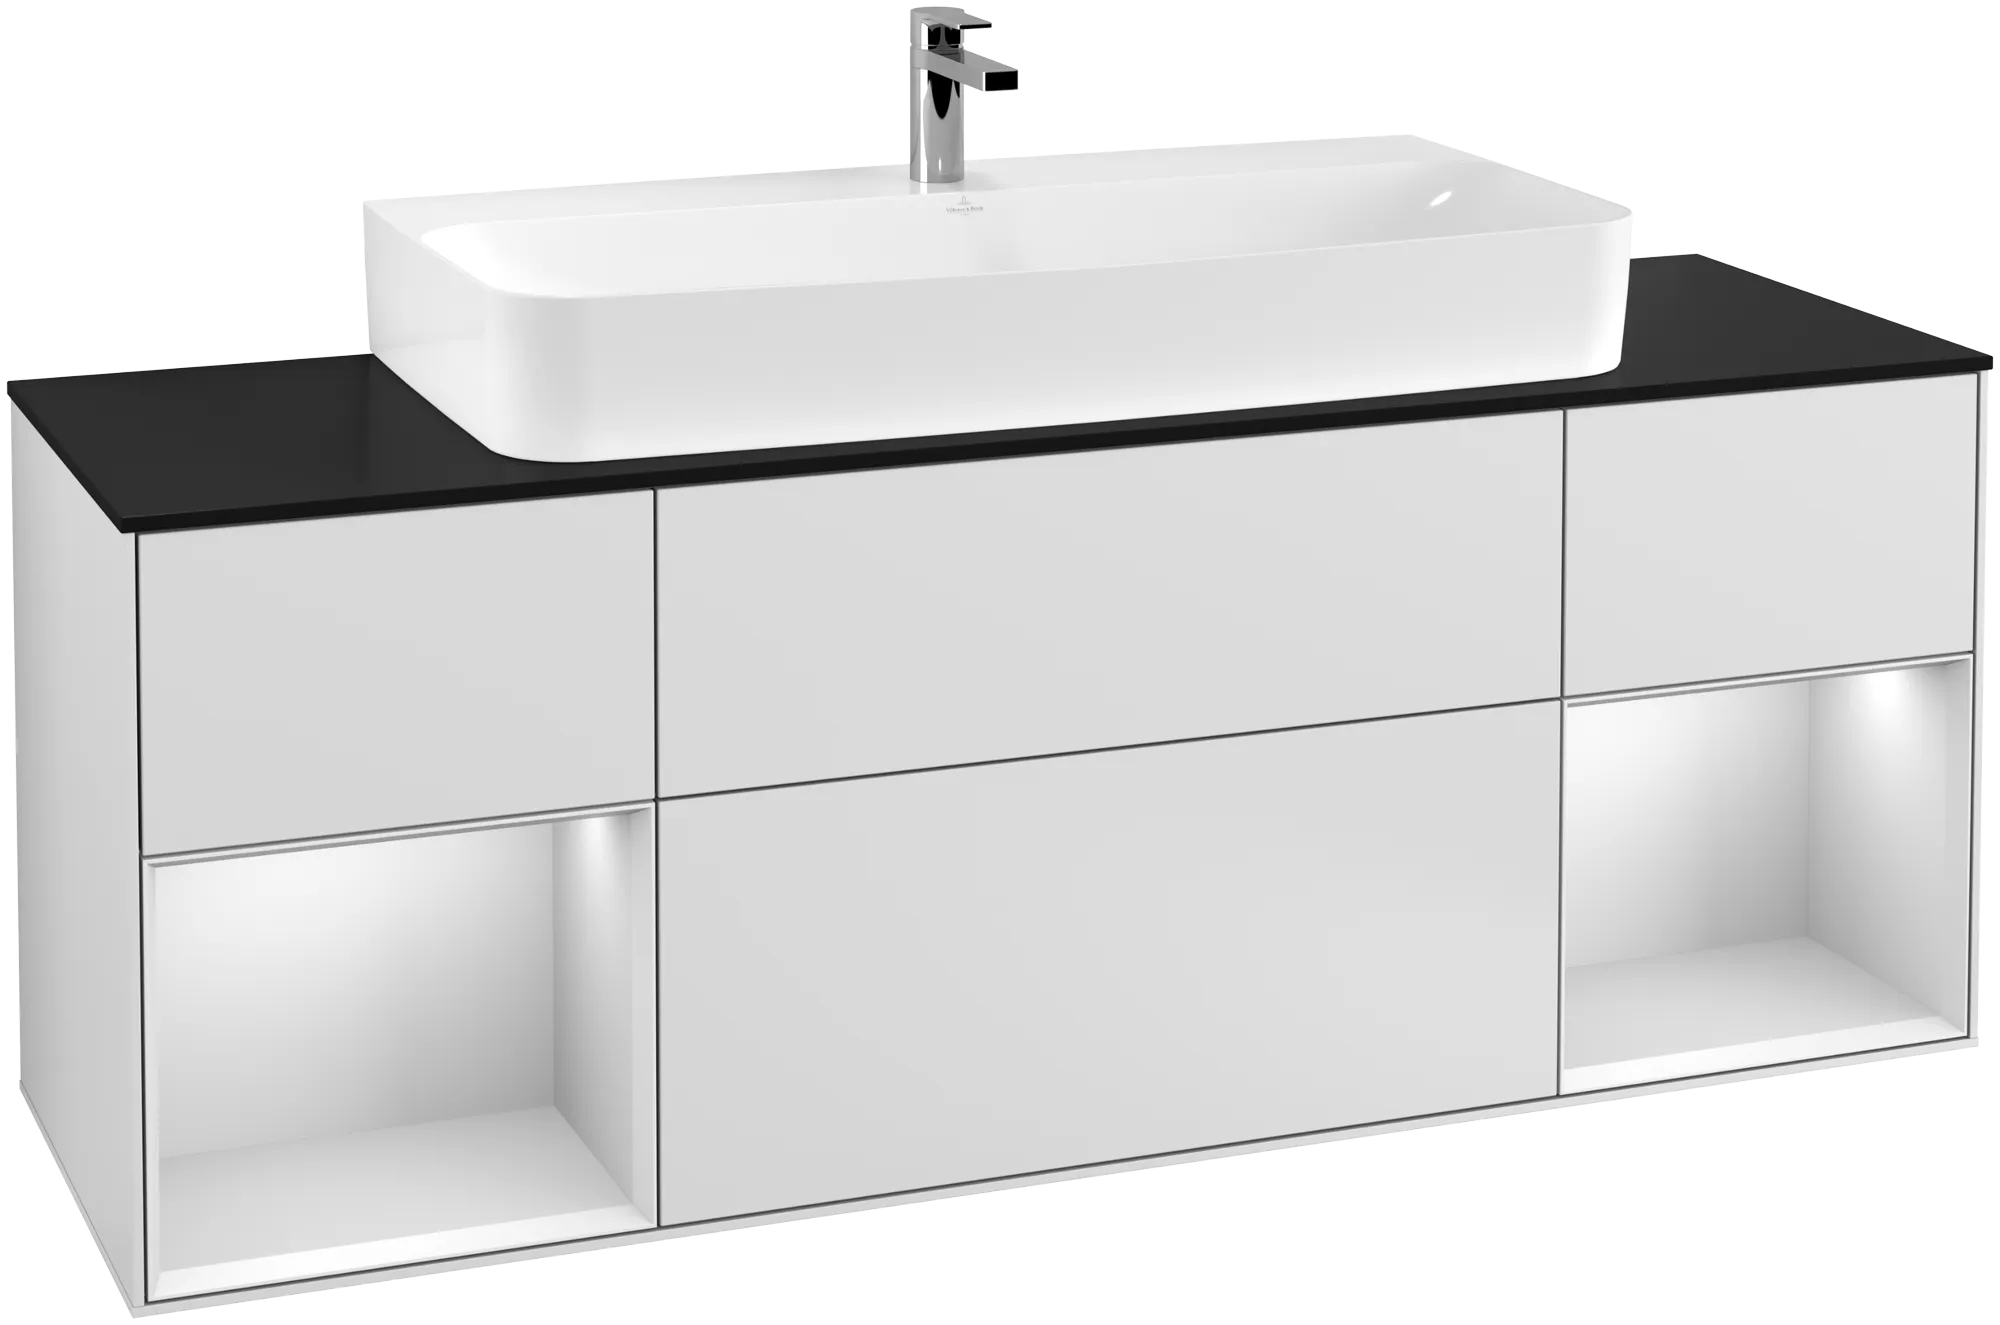 Picture of VILLEROY BOCH Finion Vanity unit, with lighting, 4 pull-out compartments, 1600 x 603 x 501 mm, White Matt Lacquer / White Matt Lacquer / Glass Black Matt #G212MTMT